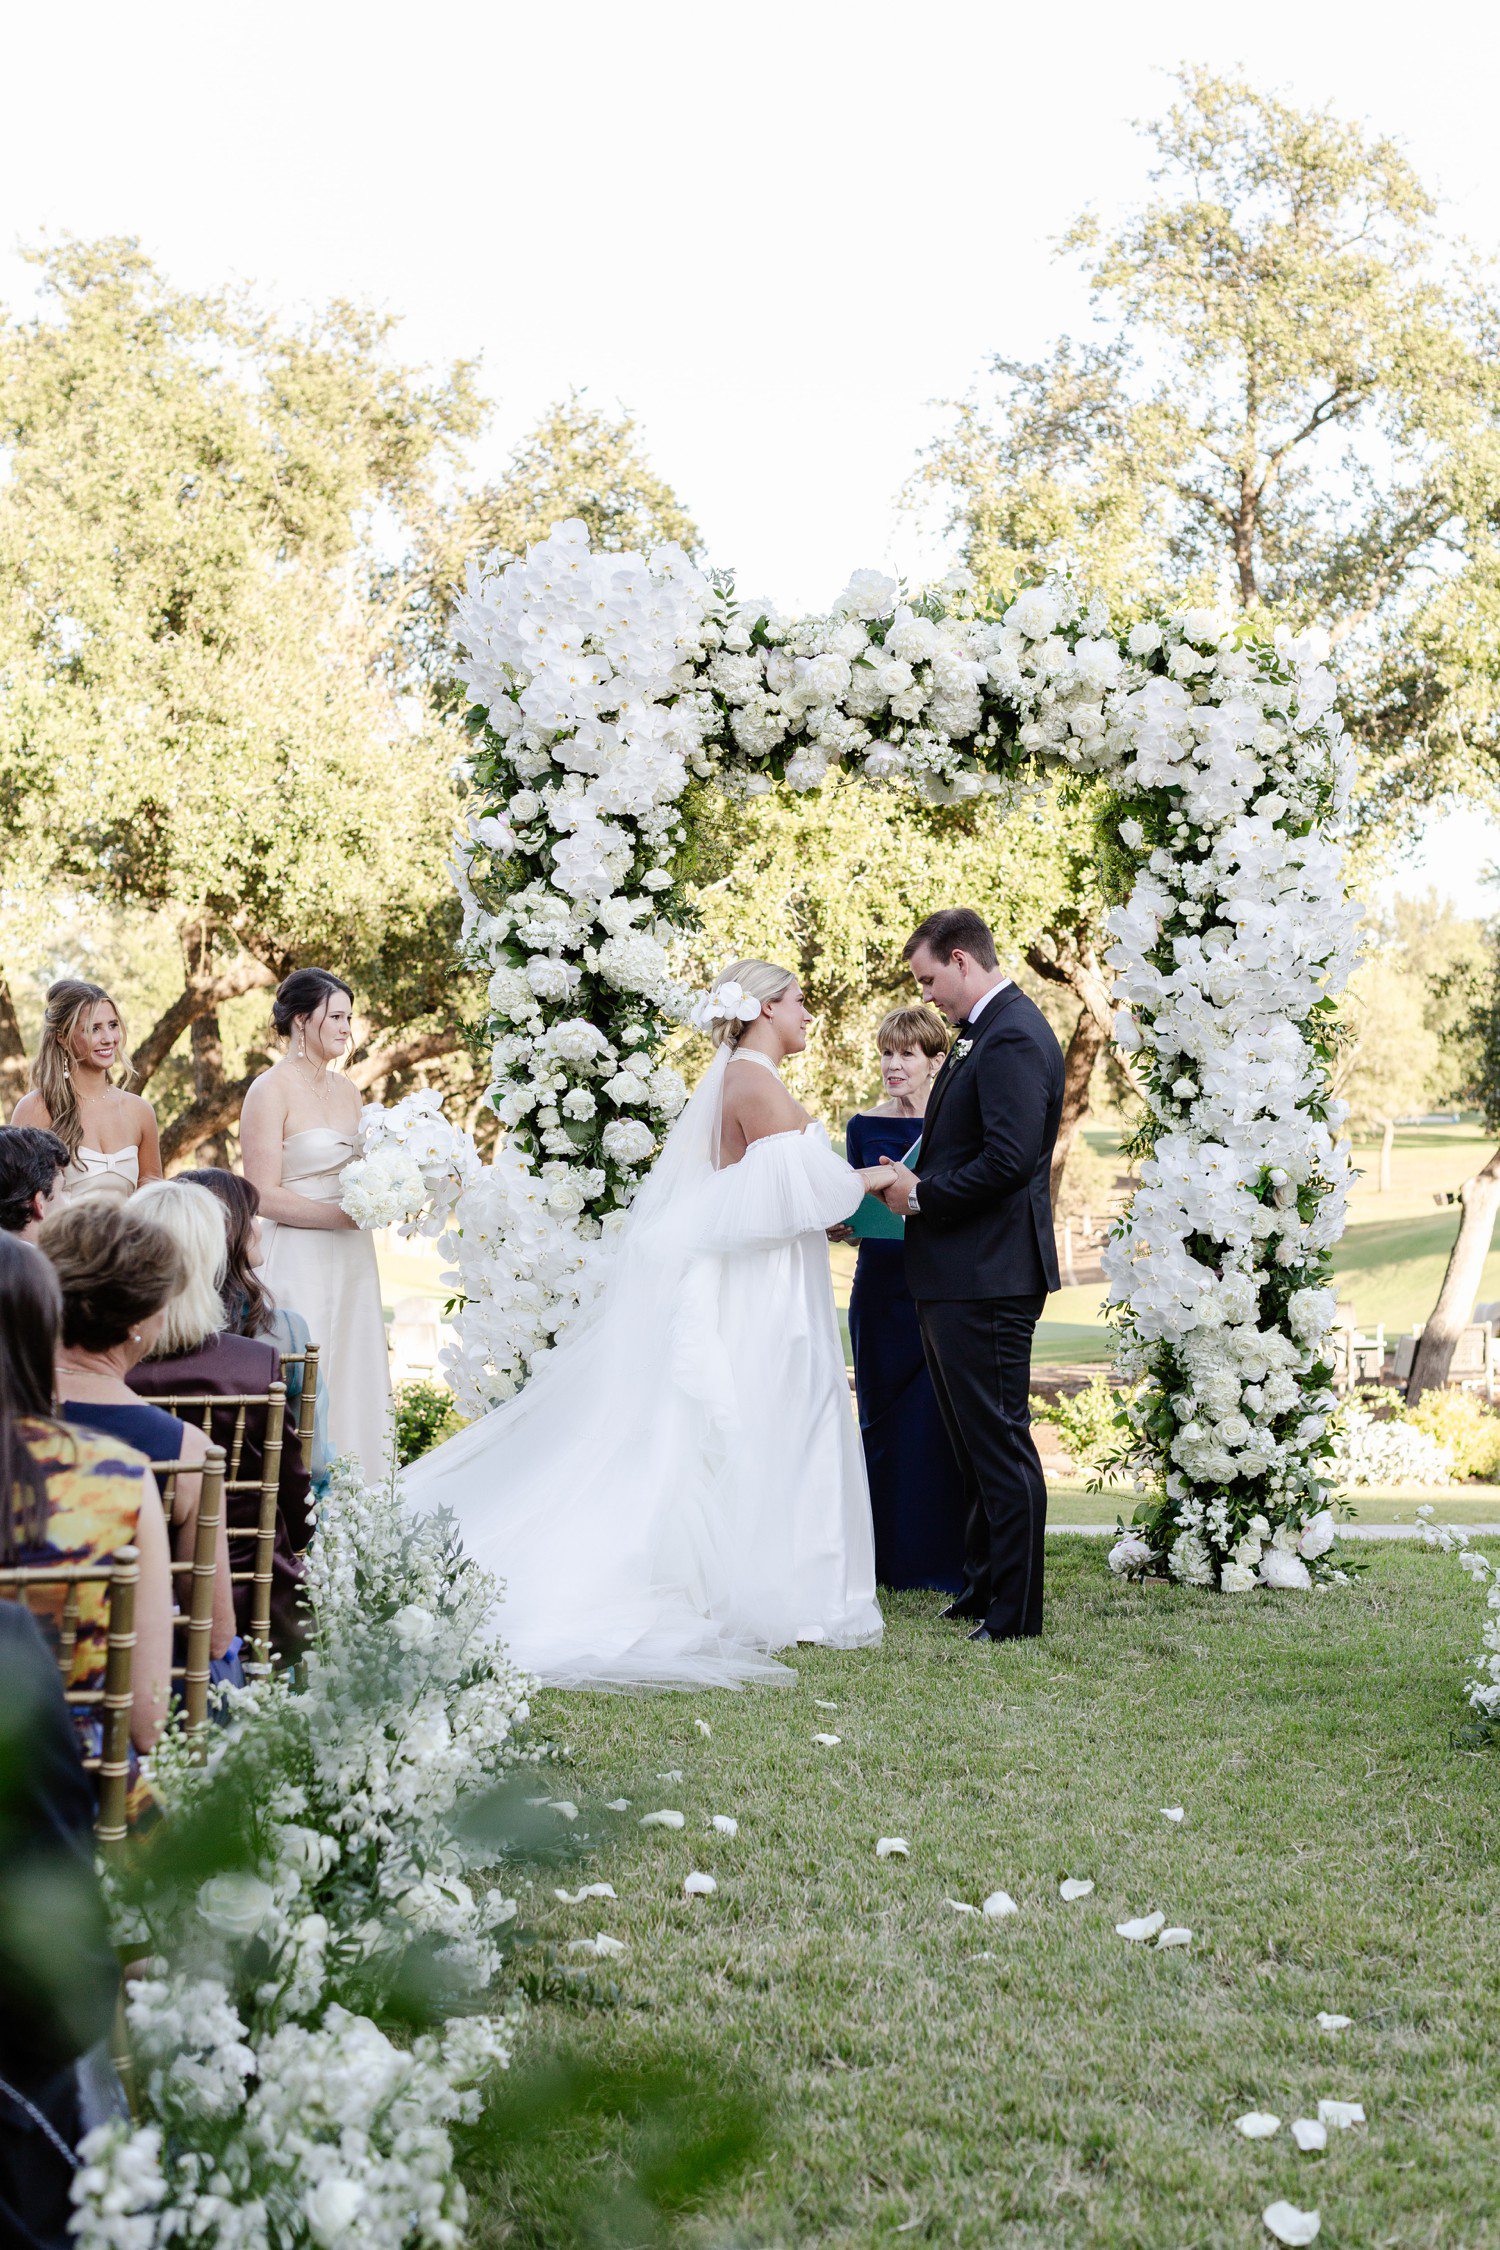 Bride and groom reading vows during wedding at Austin Country Club.